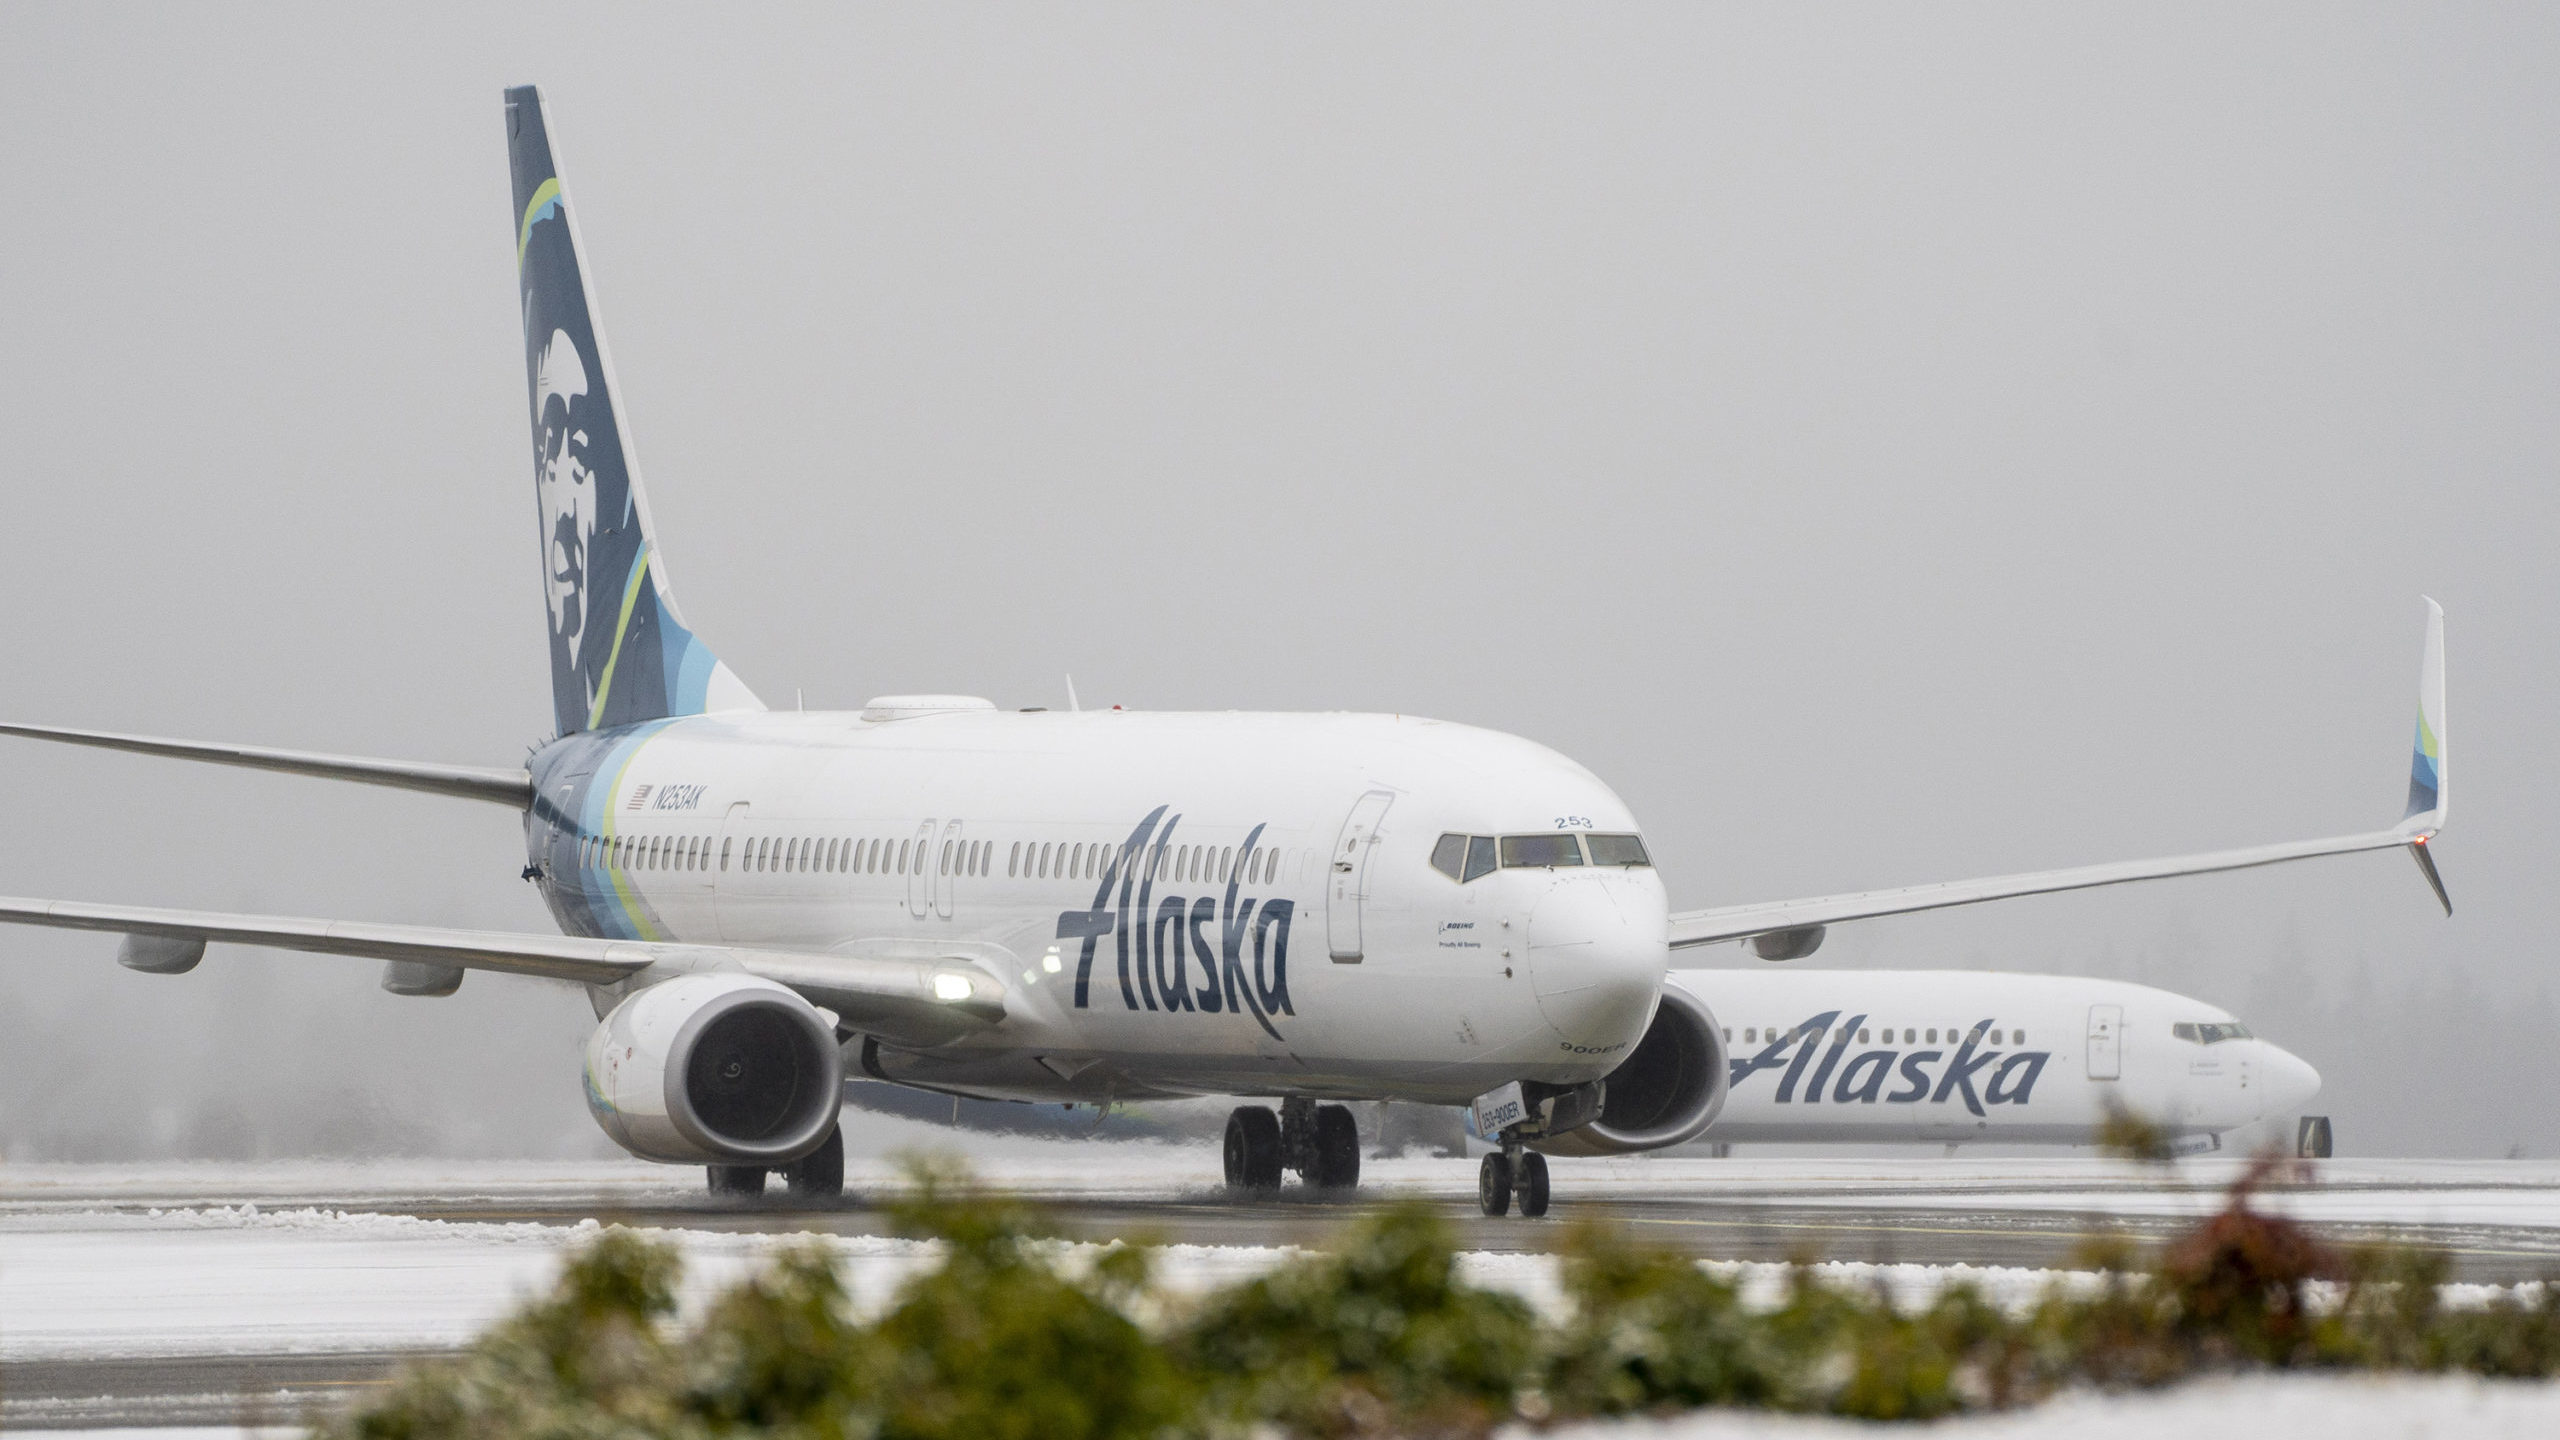 Alaska Airlines planes during a snow storm at Seattle-Tacoma International Airport (SEA) in Seattle...